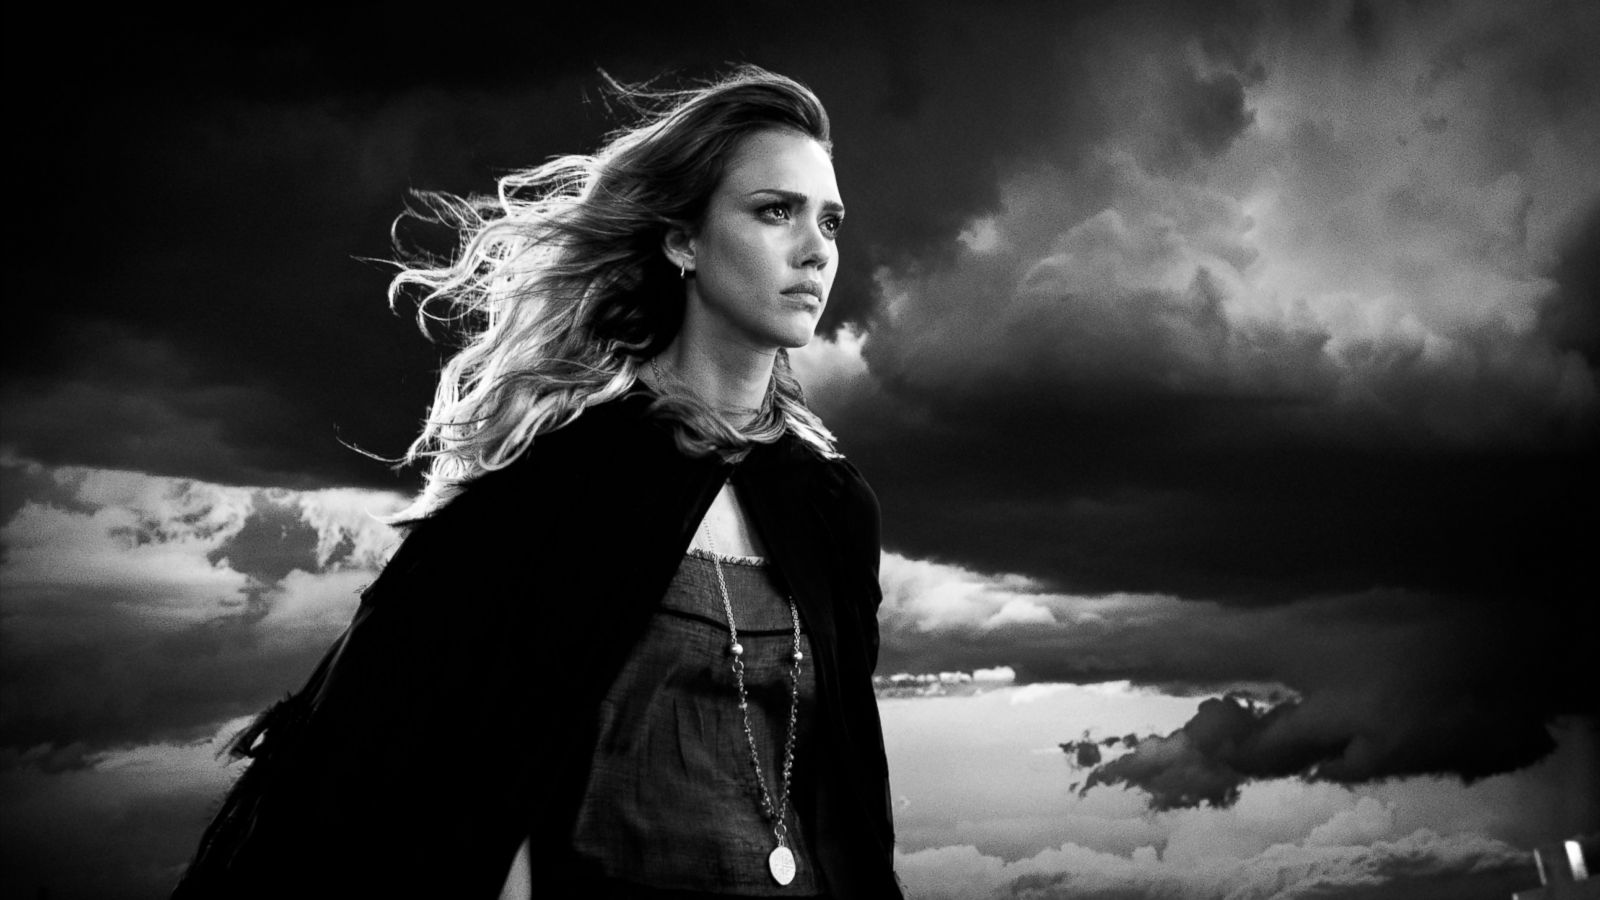 Watch Sin City: A Dame to Kill For